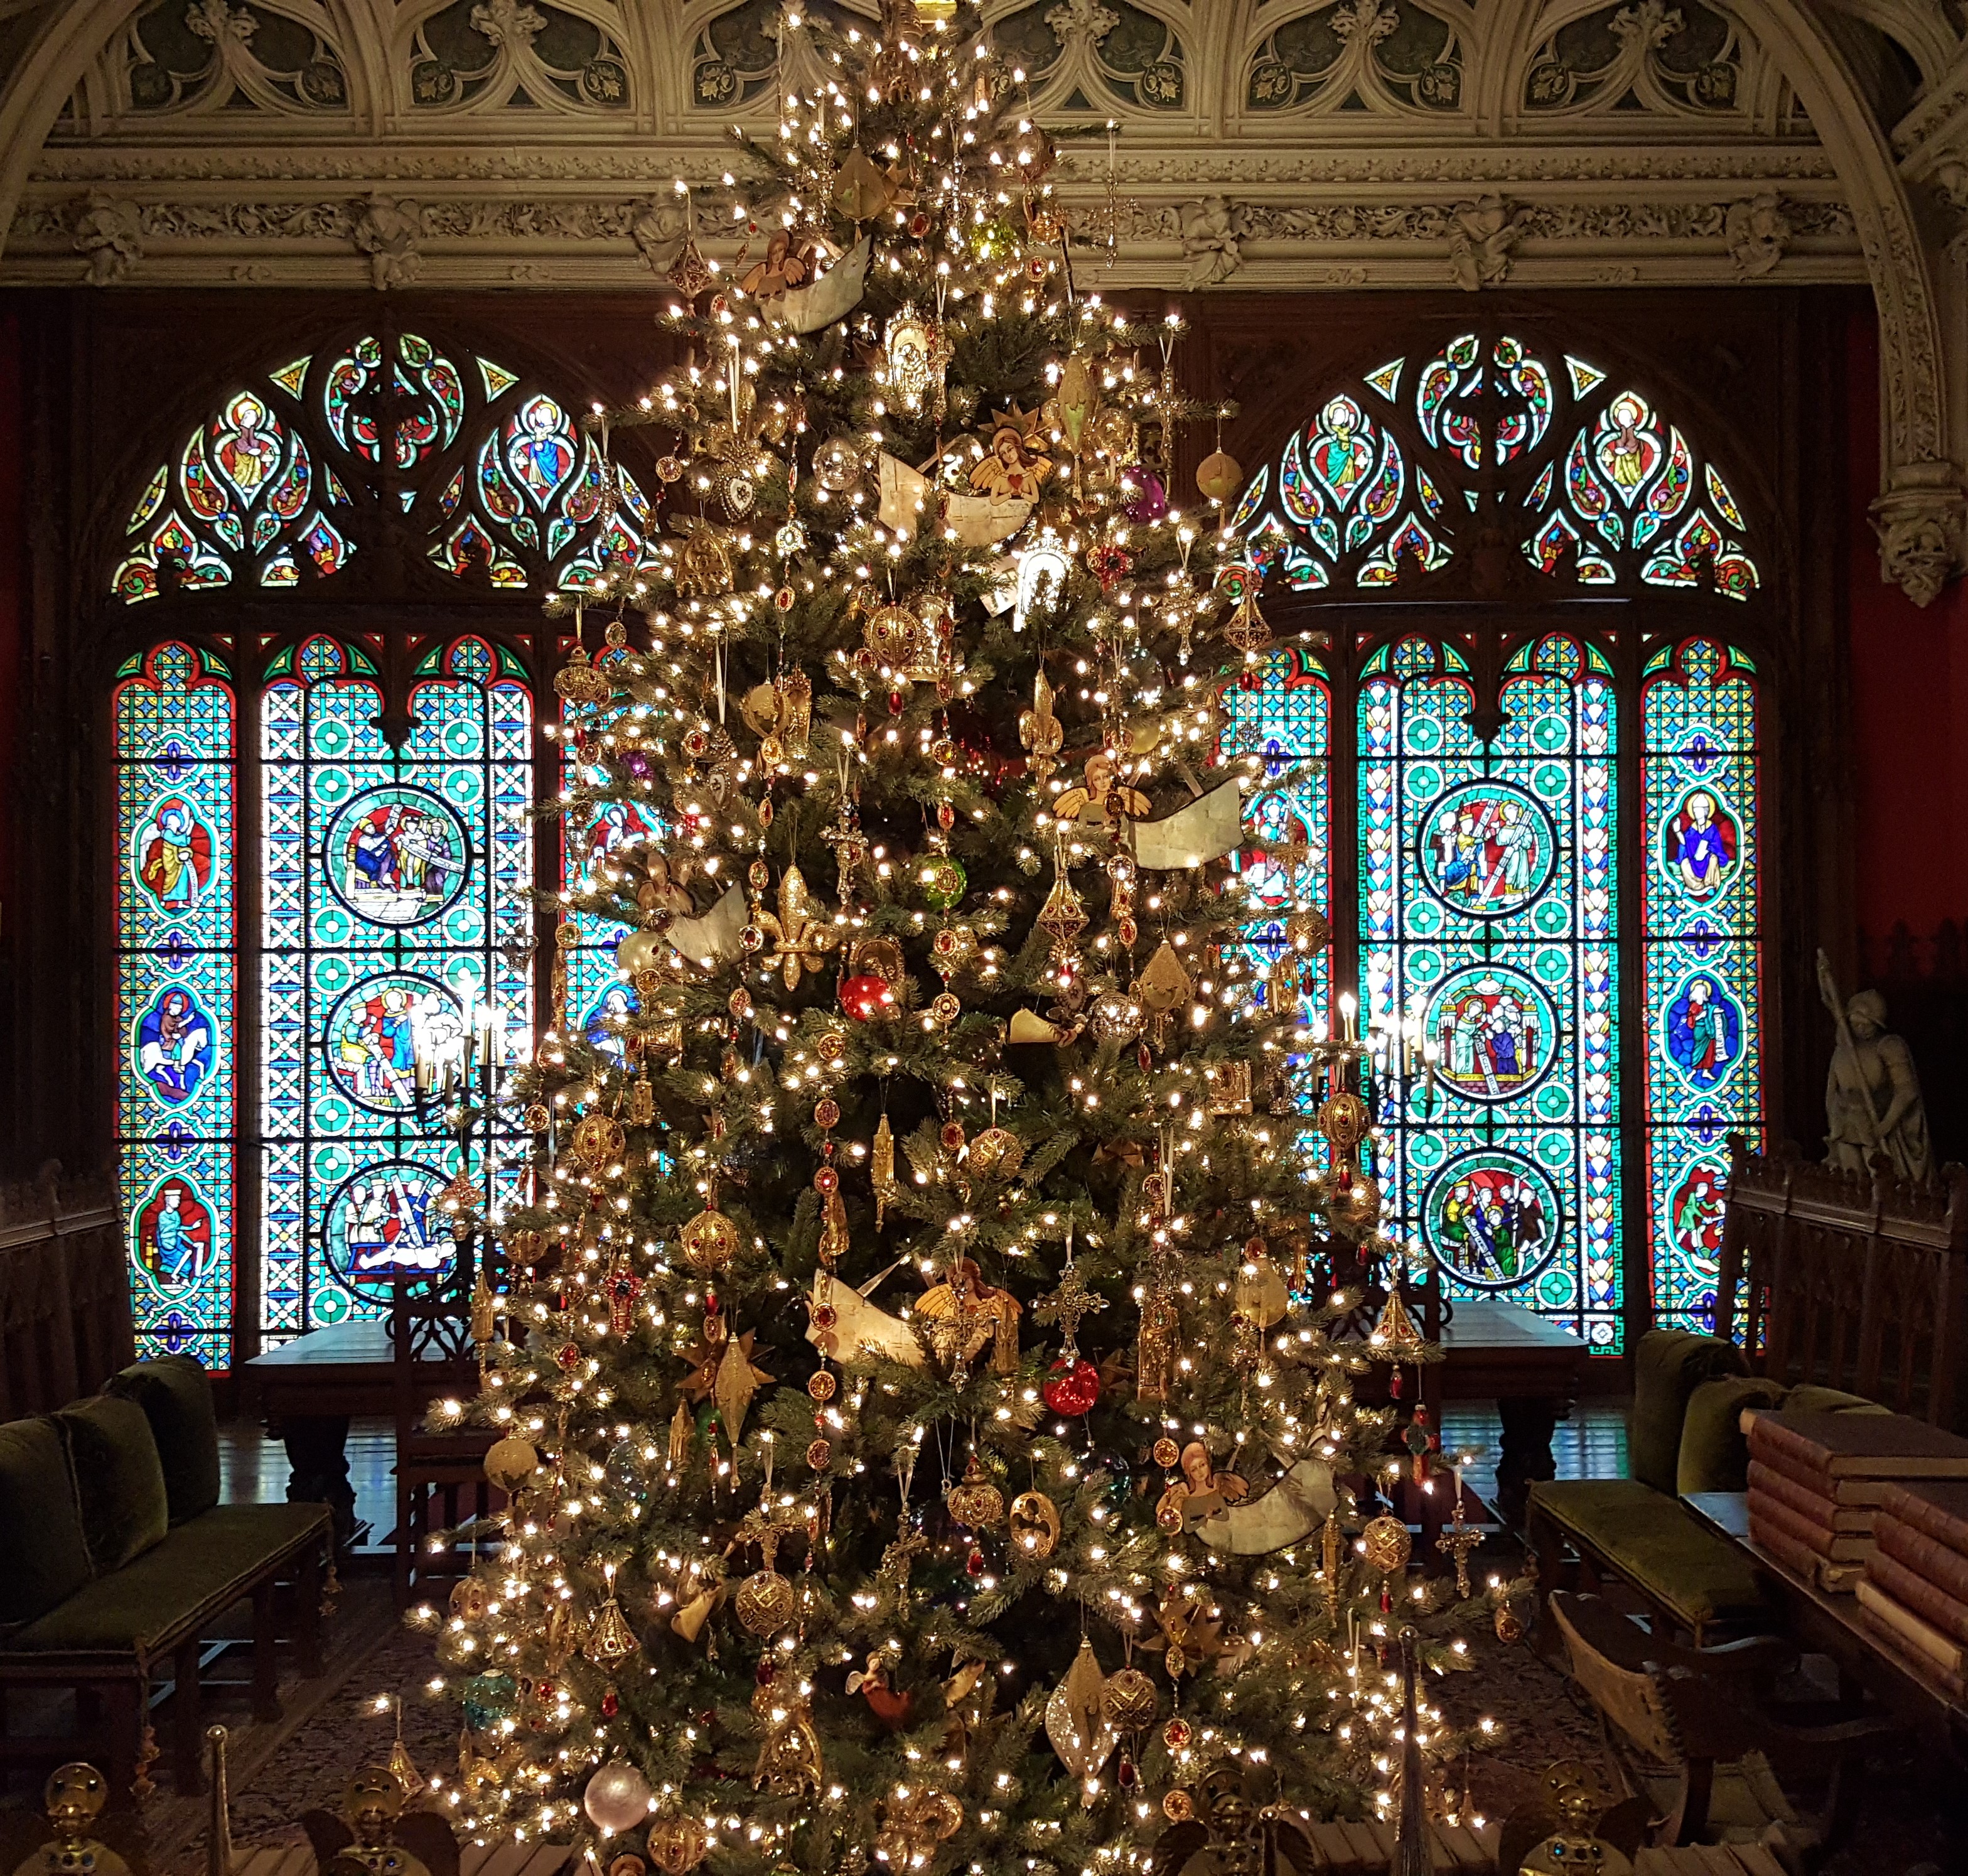 View of a decorated Christmas Tree inside the Marble House in Newport, RI.